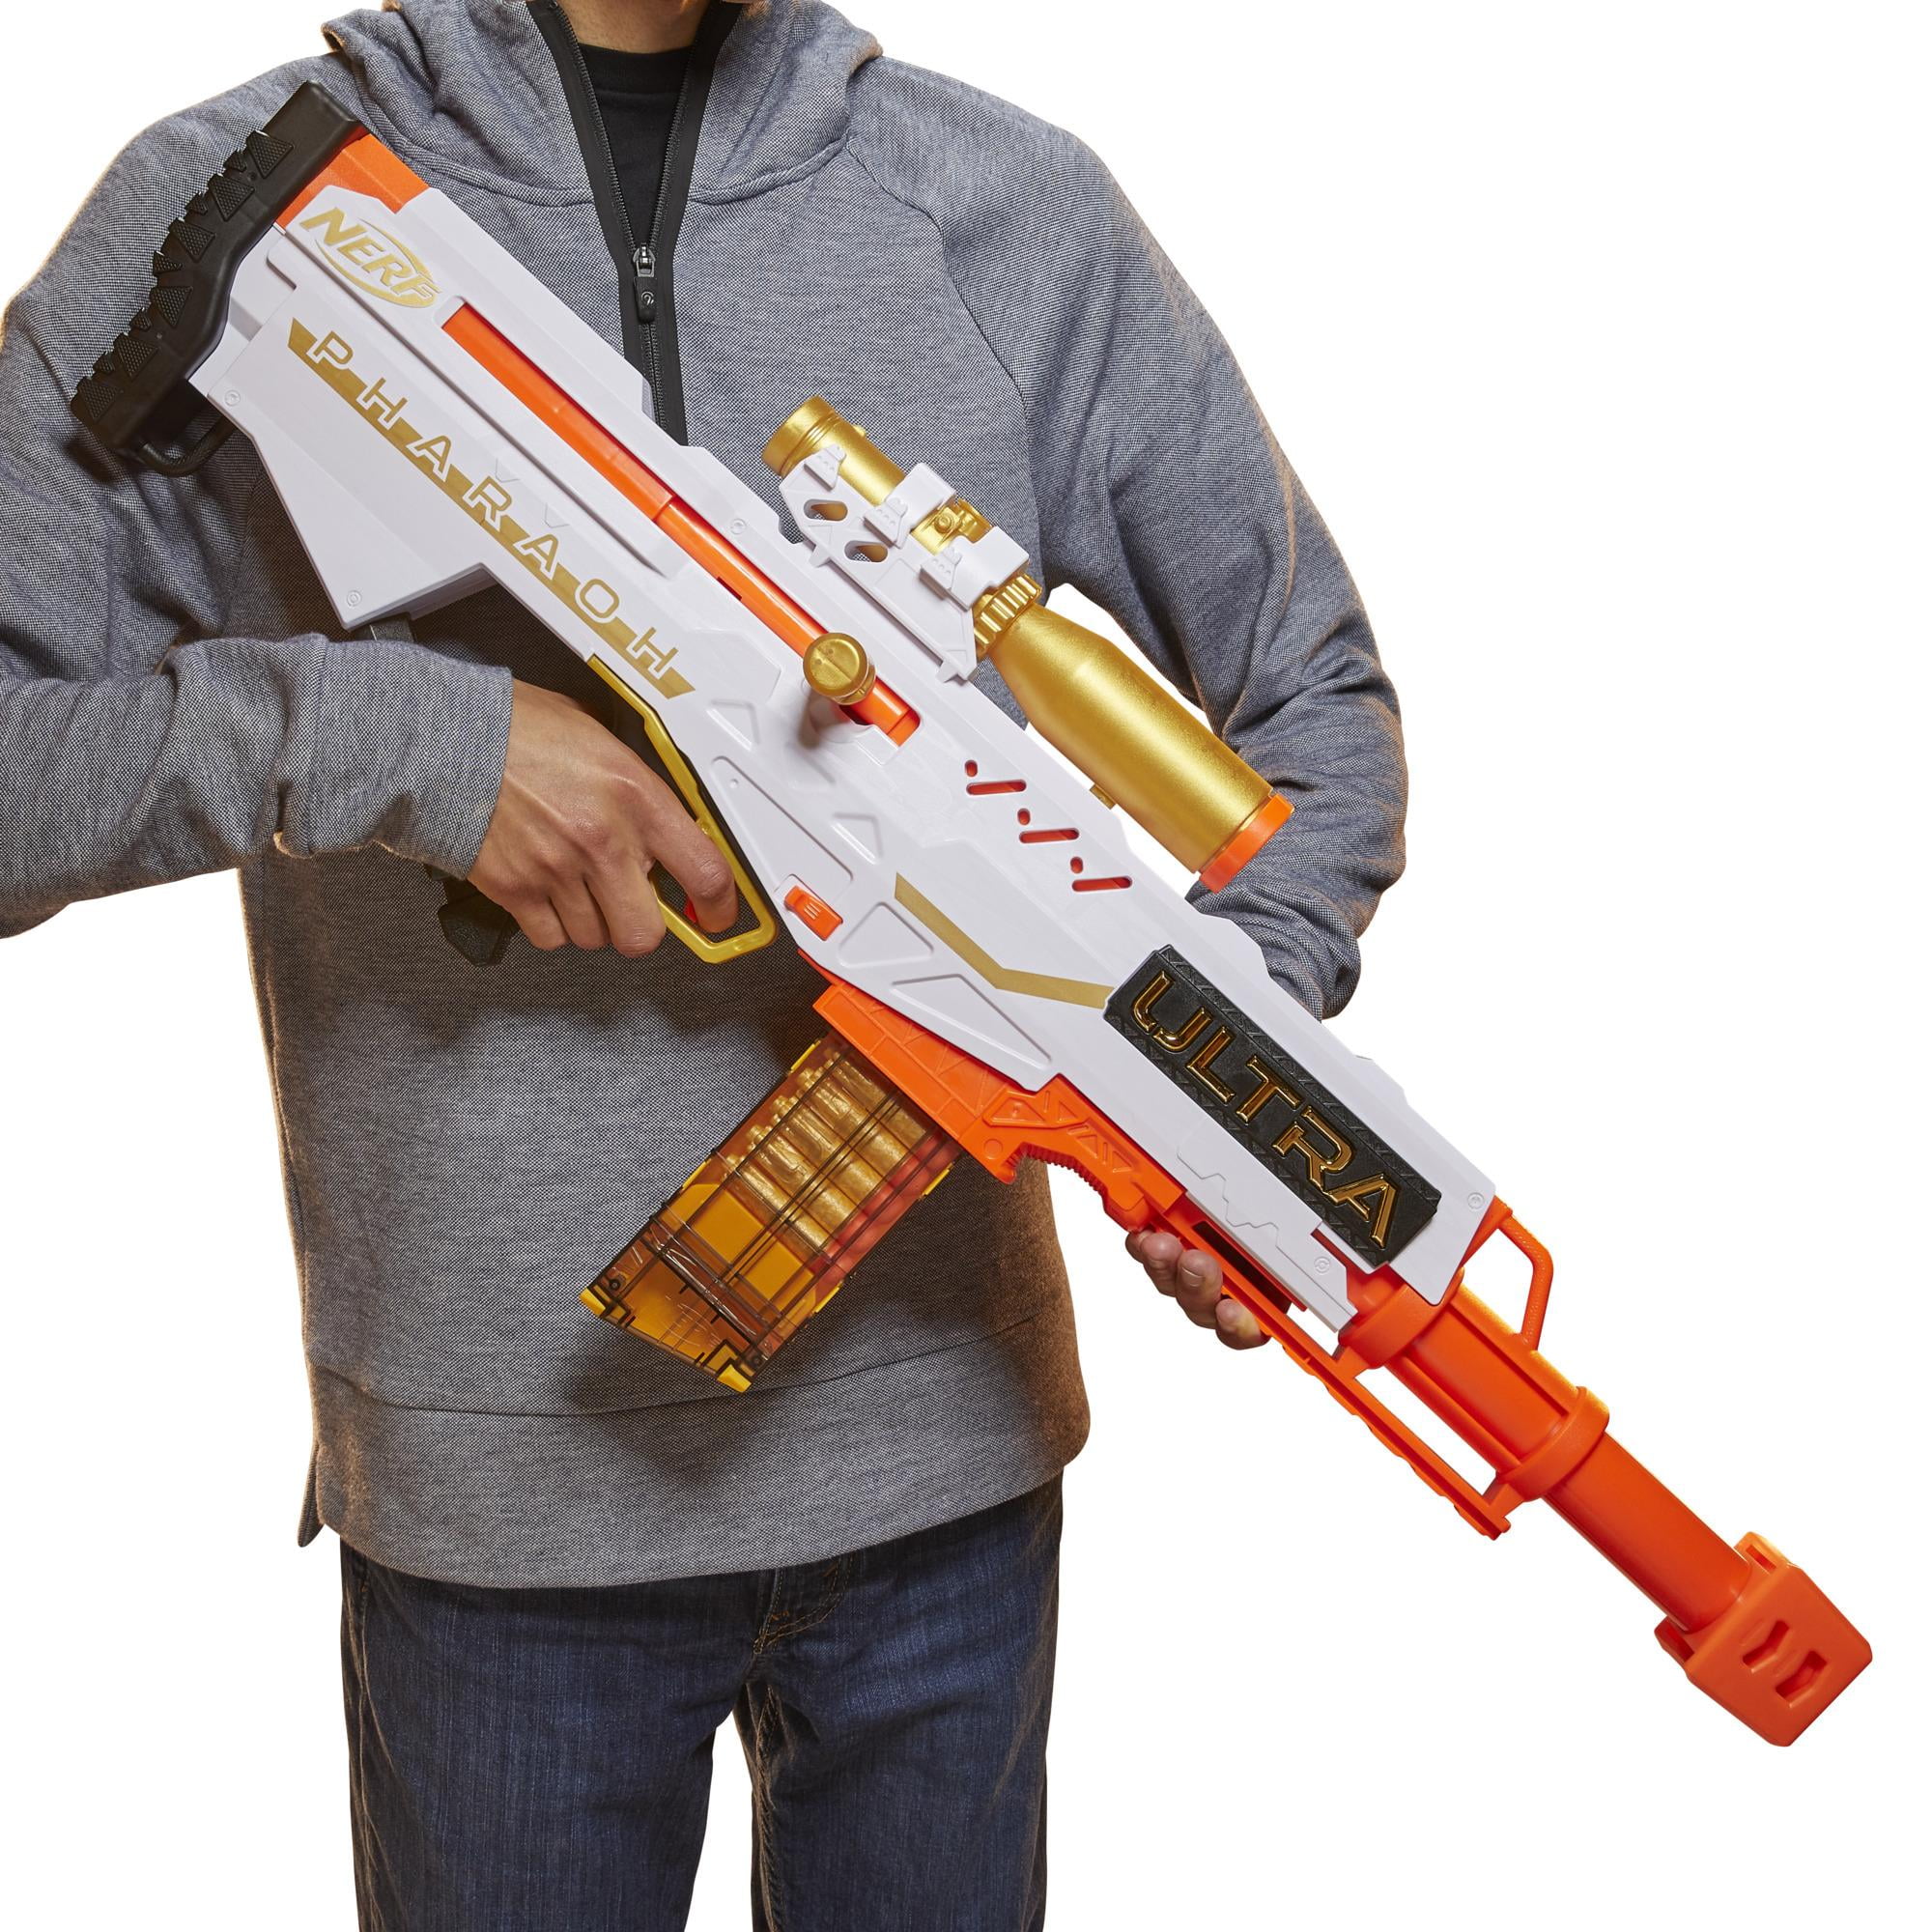  NERF Ultra Pharaoh Blaster with Premium Gold Accents, 10-Dart  Clip, 10 Ultra Darts, Bolt Action, Compatible Only Ultra Darts : Toys &  Games